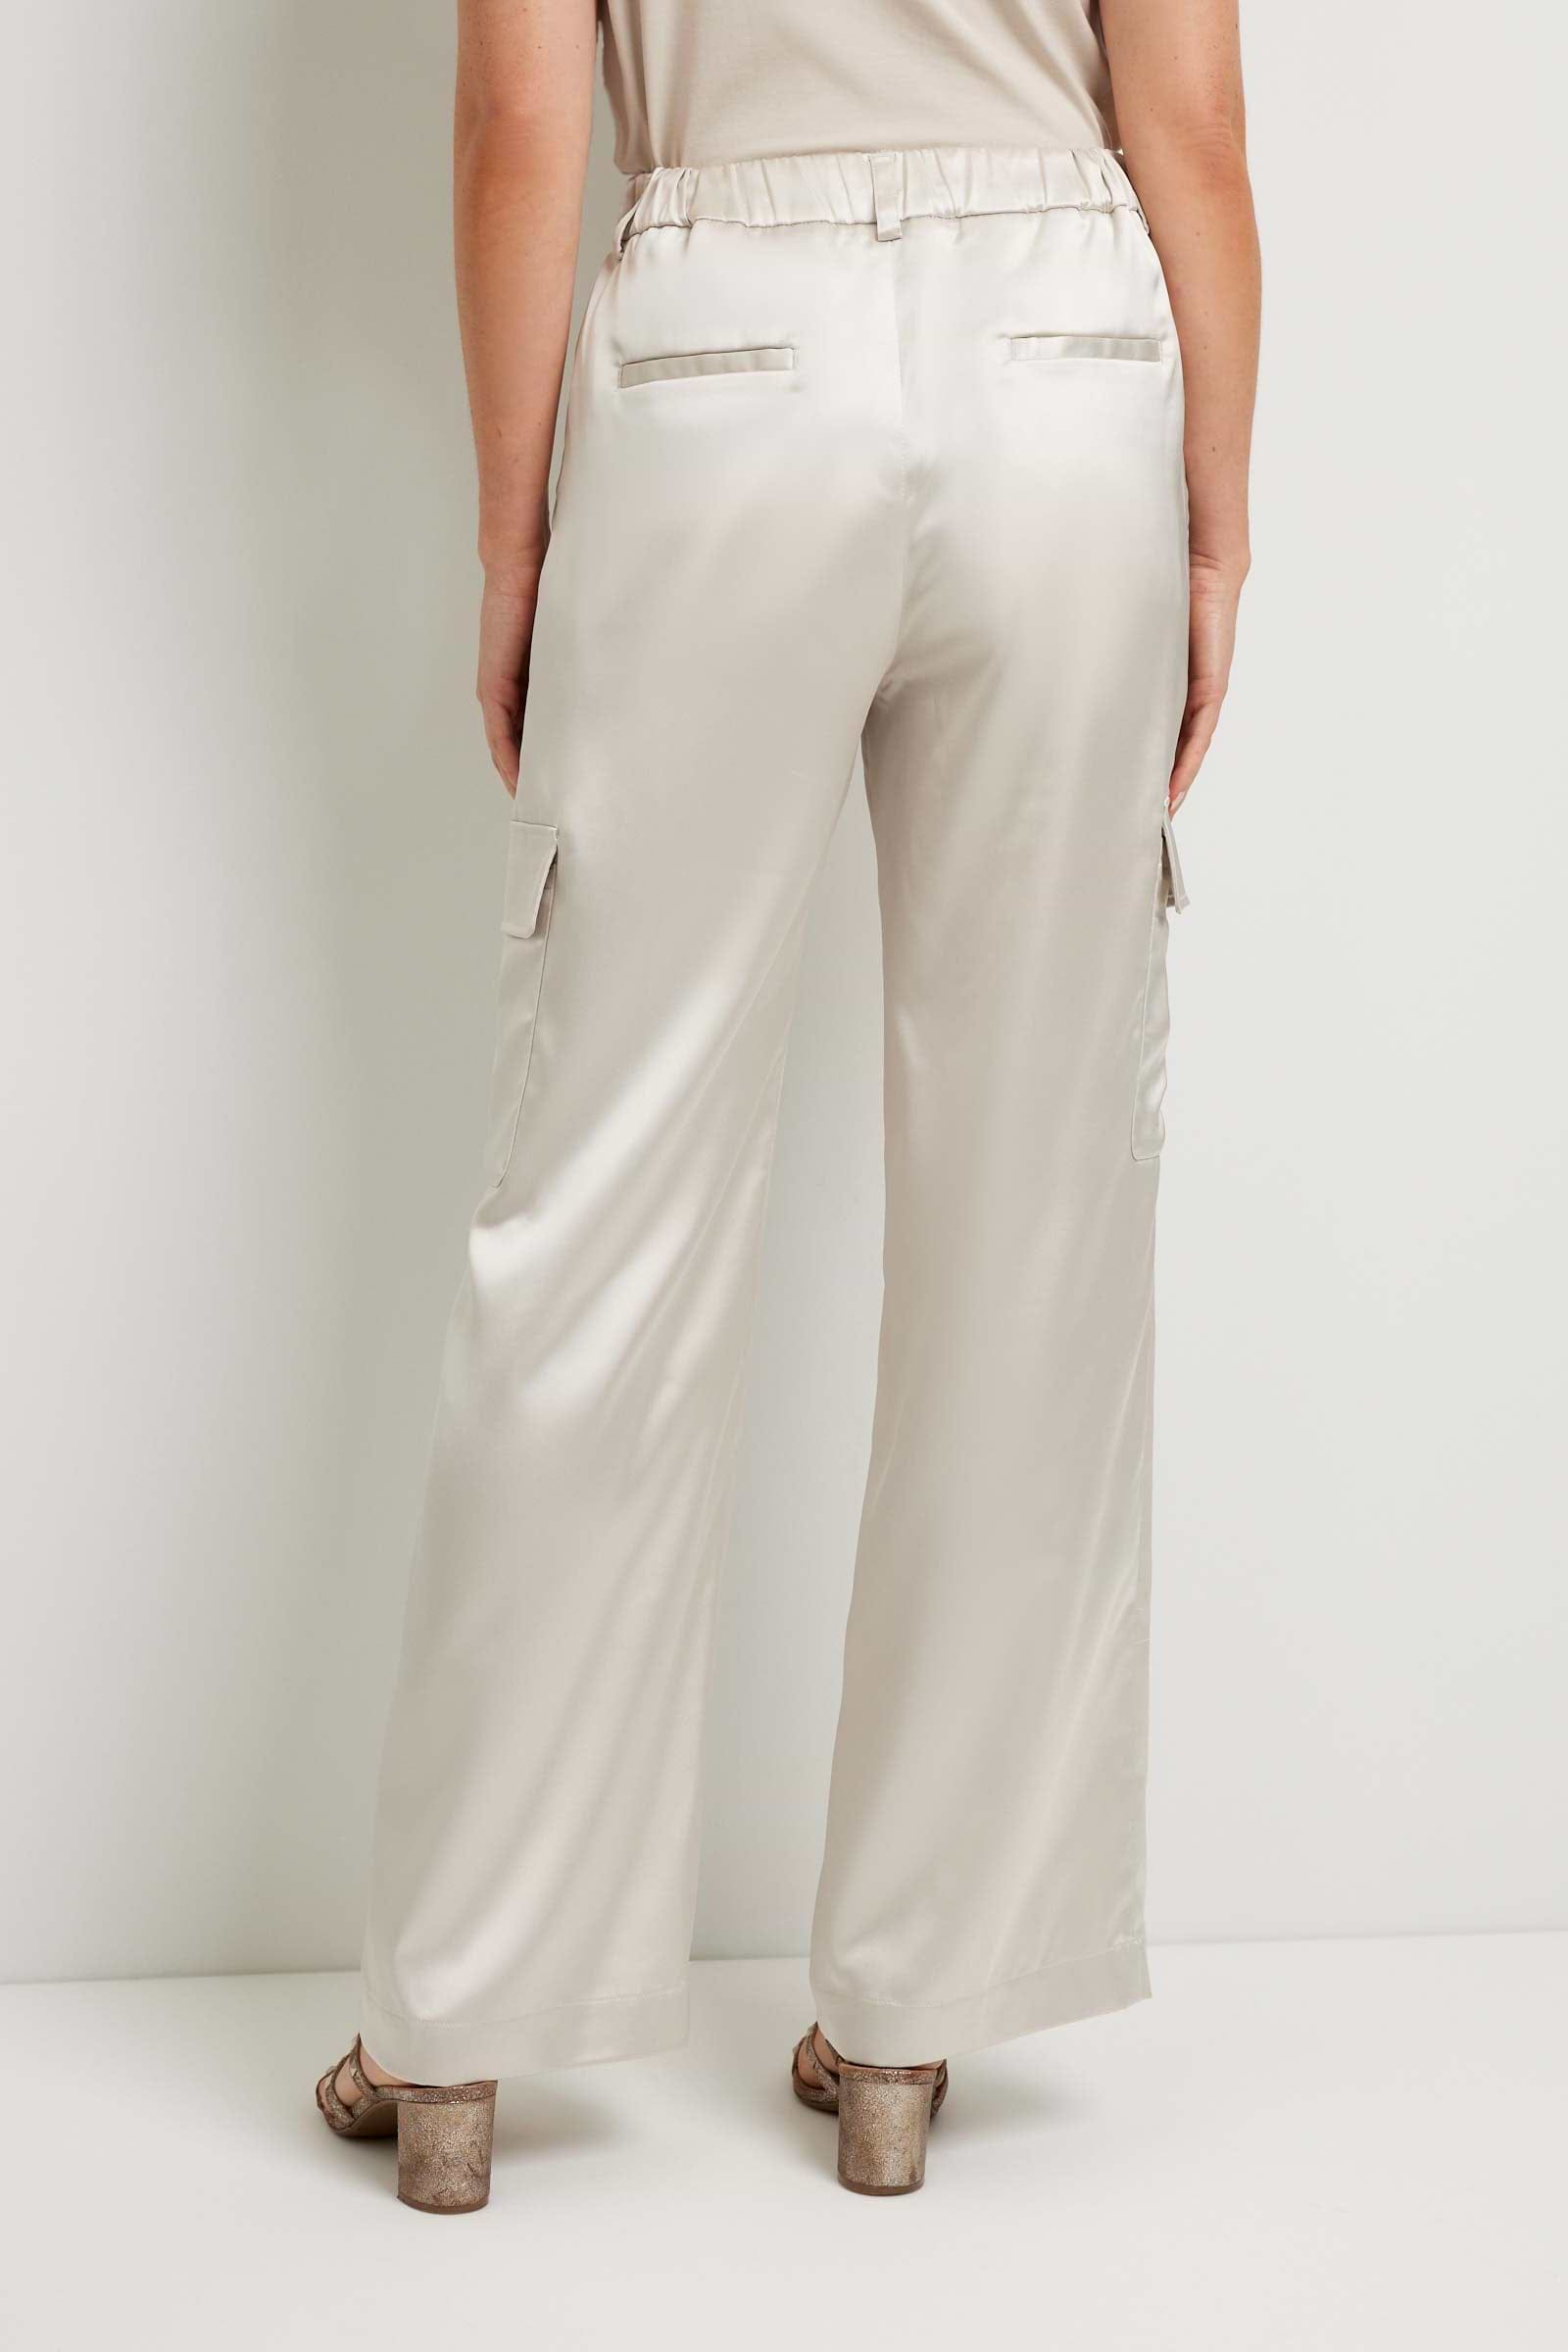 The Best Travel Pant. Back Profile of a Candela Satin Pant in Stone.